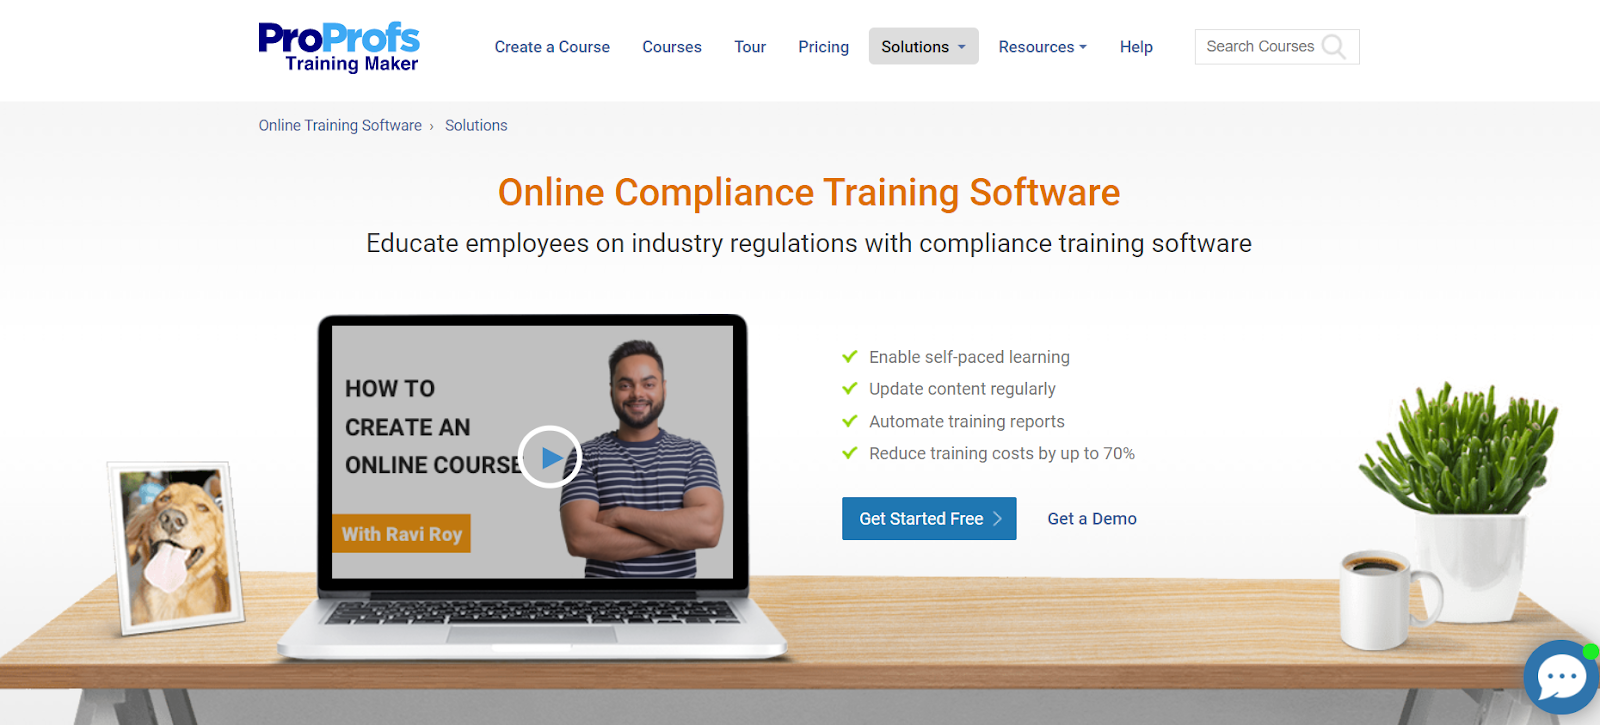 Compliance Training Software